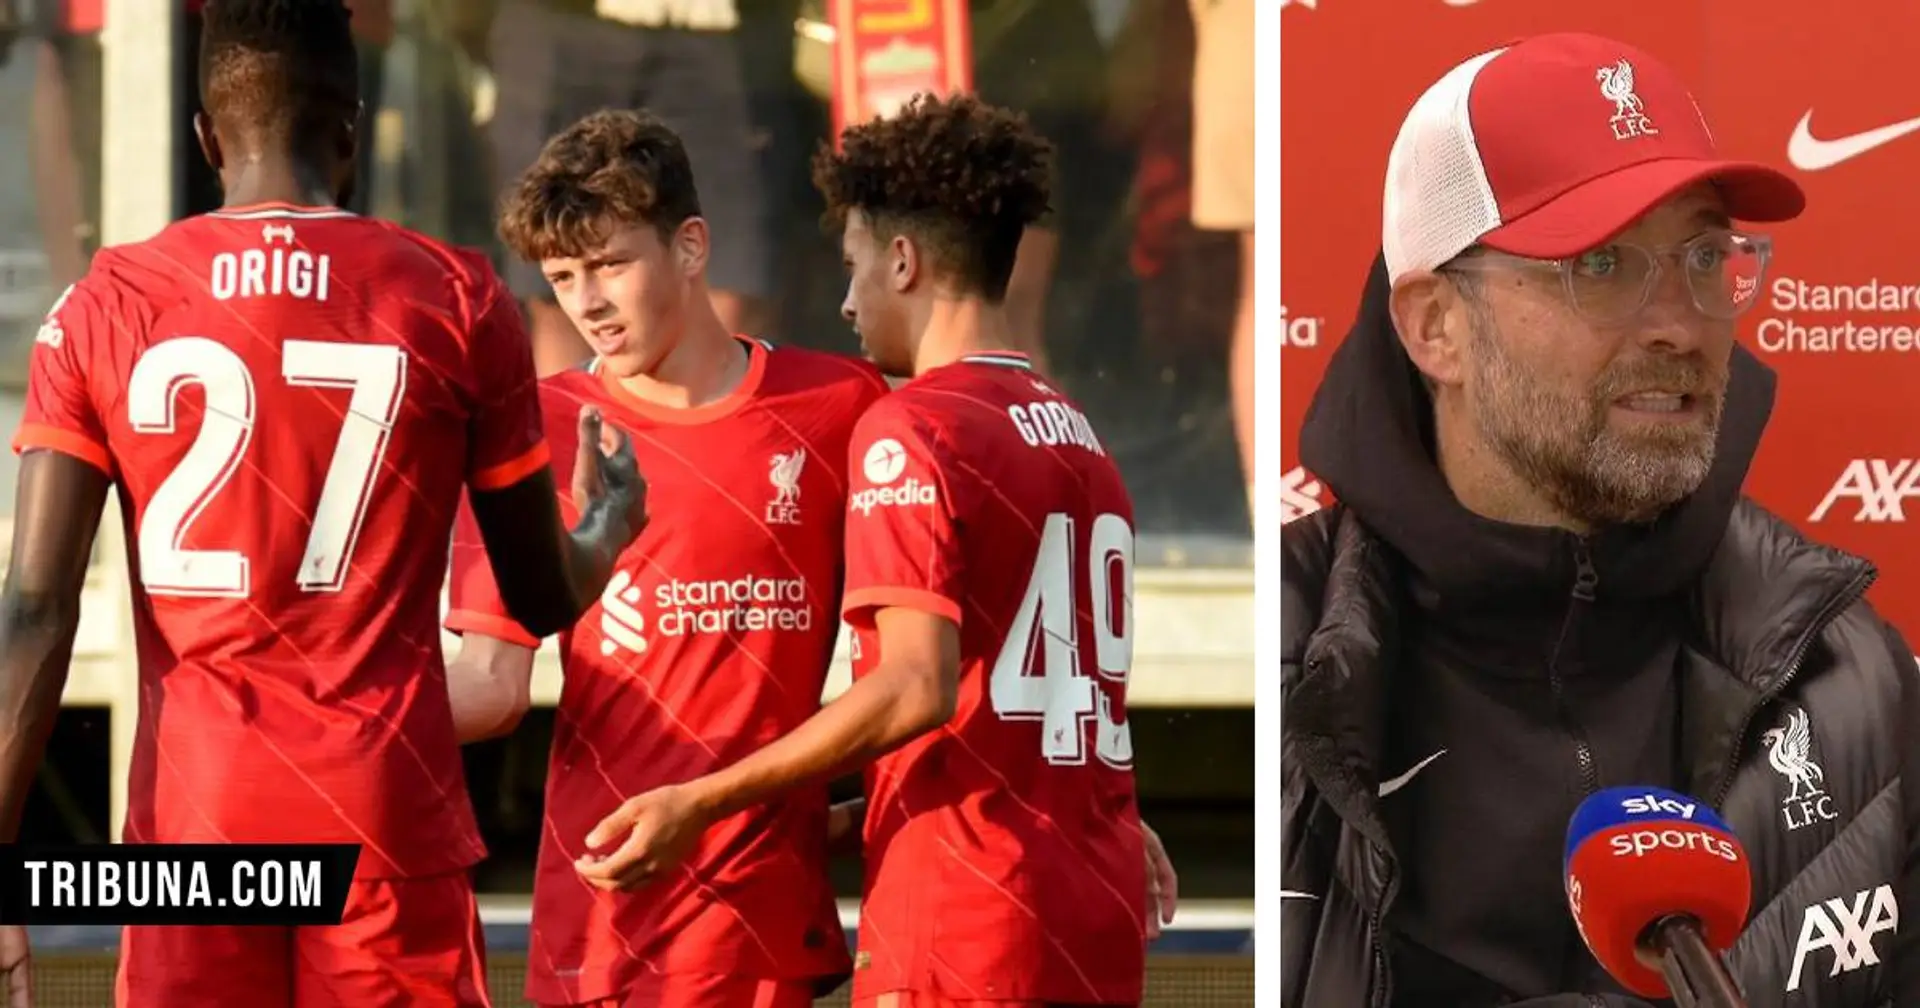 'We're helping them understand the game better': Klopp on improvement youngsters have made during preseason